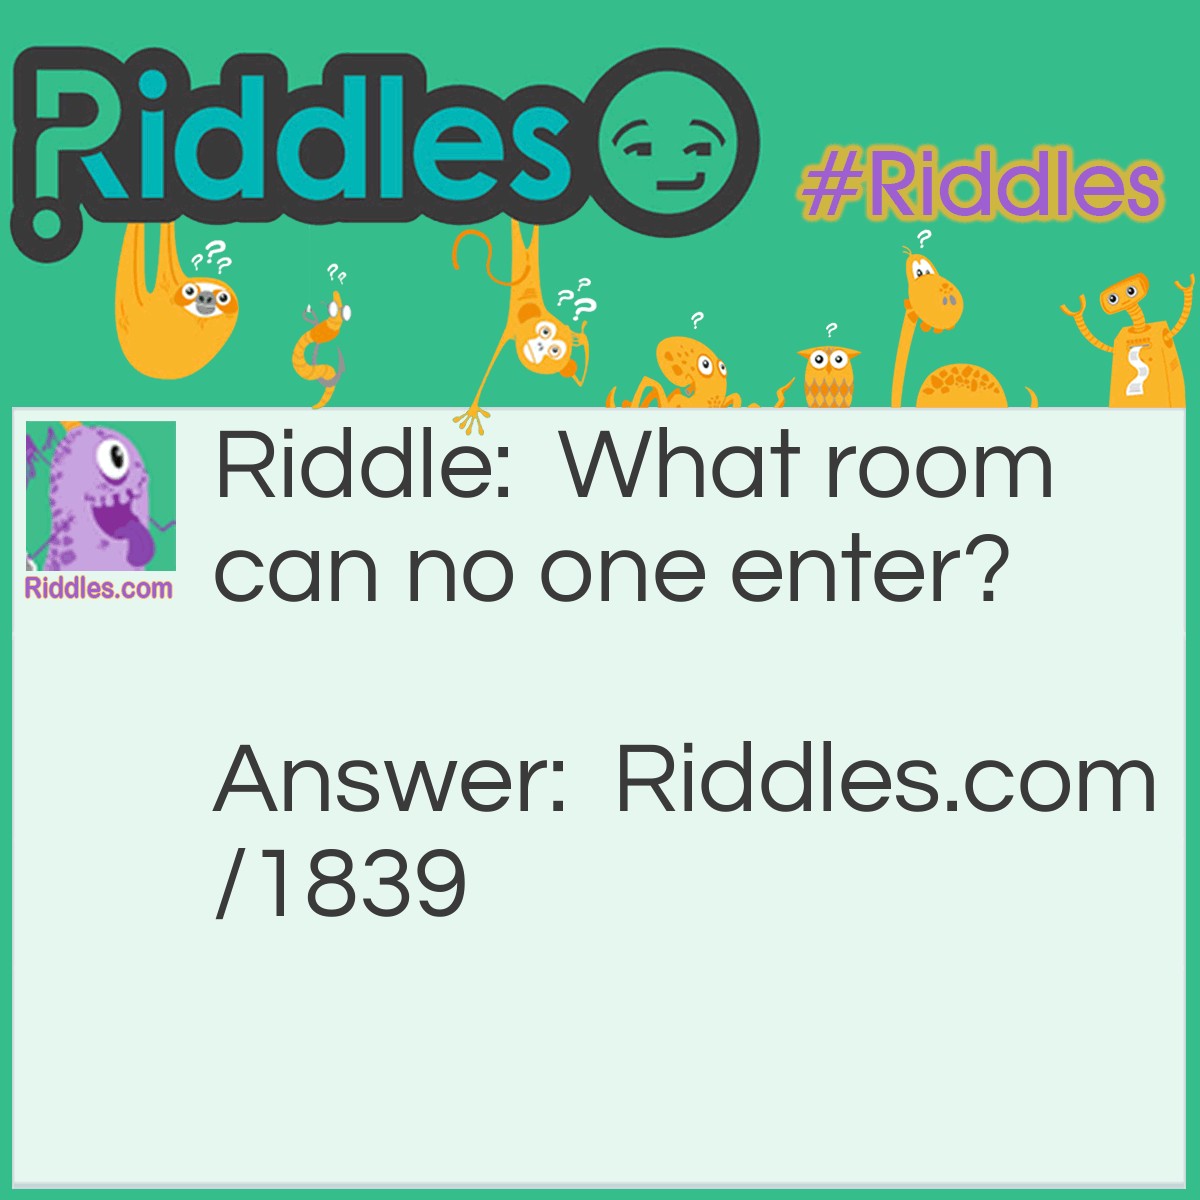 Riddle: What room can no one enter? Answer: A mushroom.